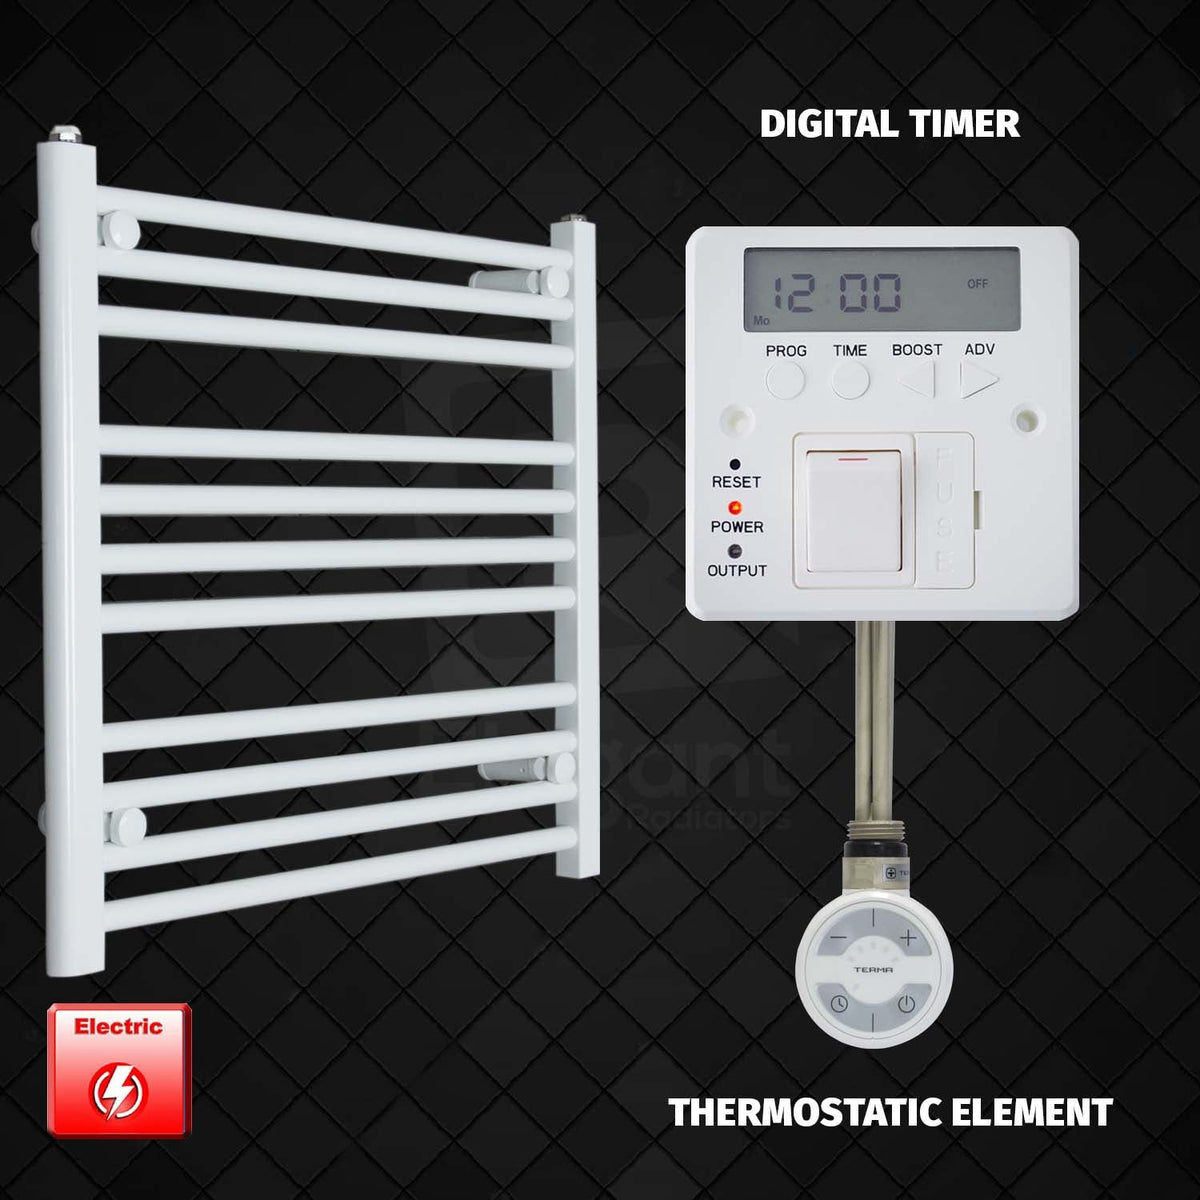 600 mm High 700 mm Wide Pre-Filled Electric Heated Towel Rail Radiator White HTR MOA Thermostatic Element Digital Timer